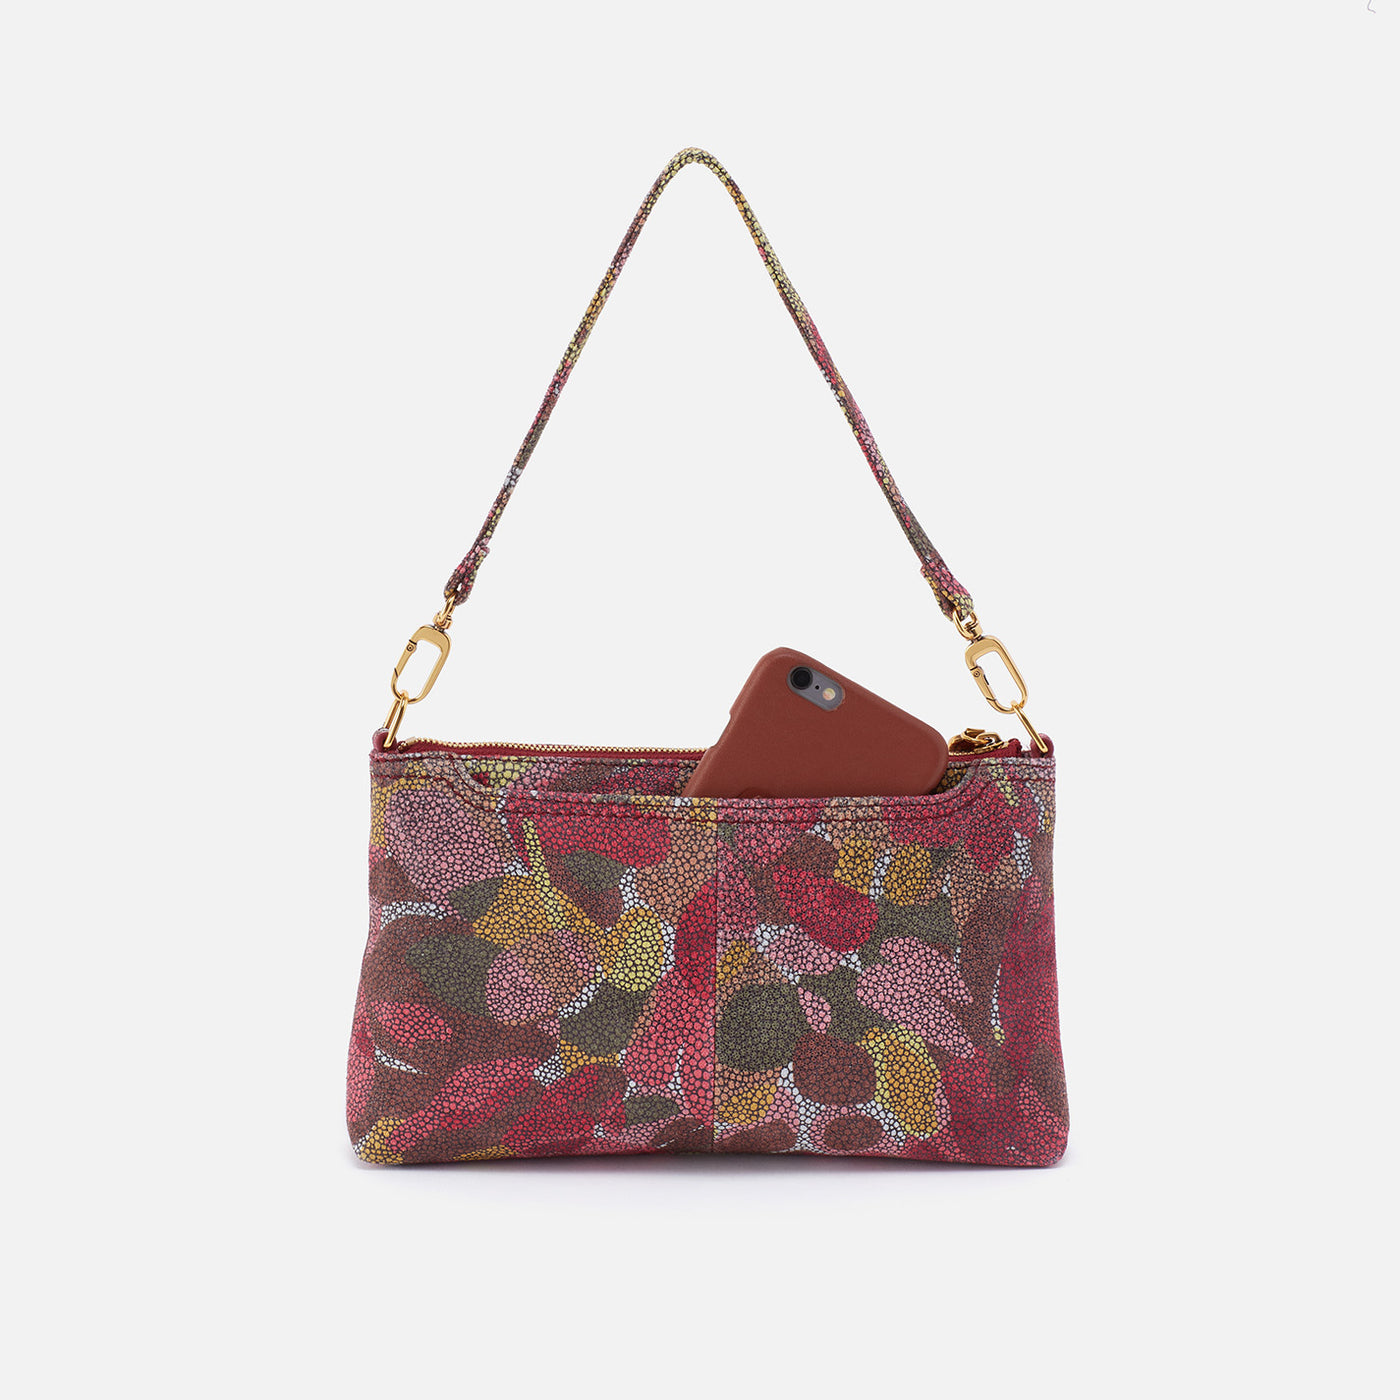 Darcy Crossbody in Printed Leather - Abstract Foliage